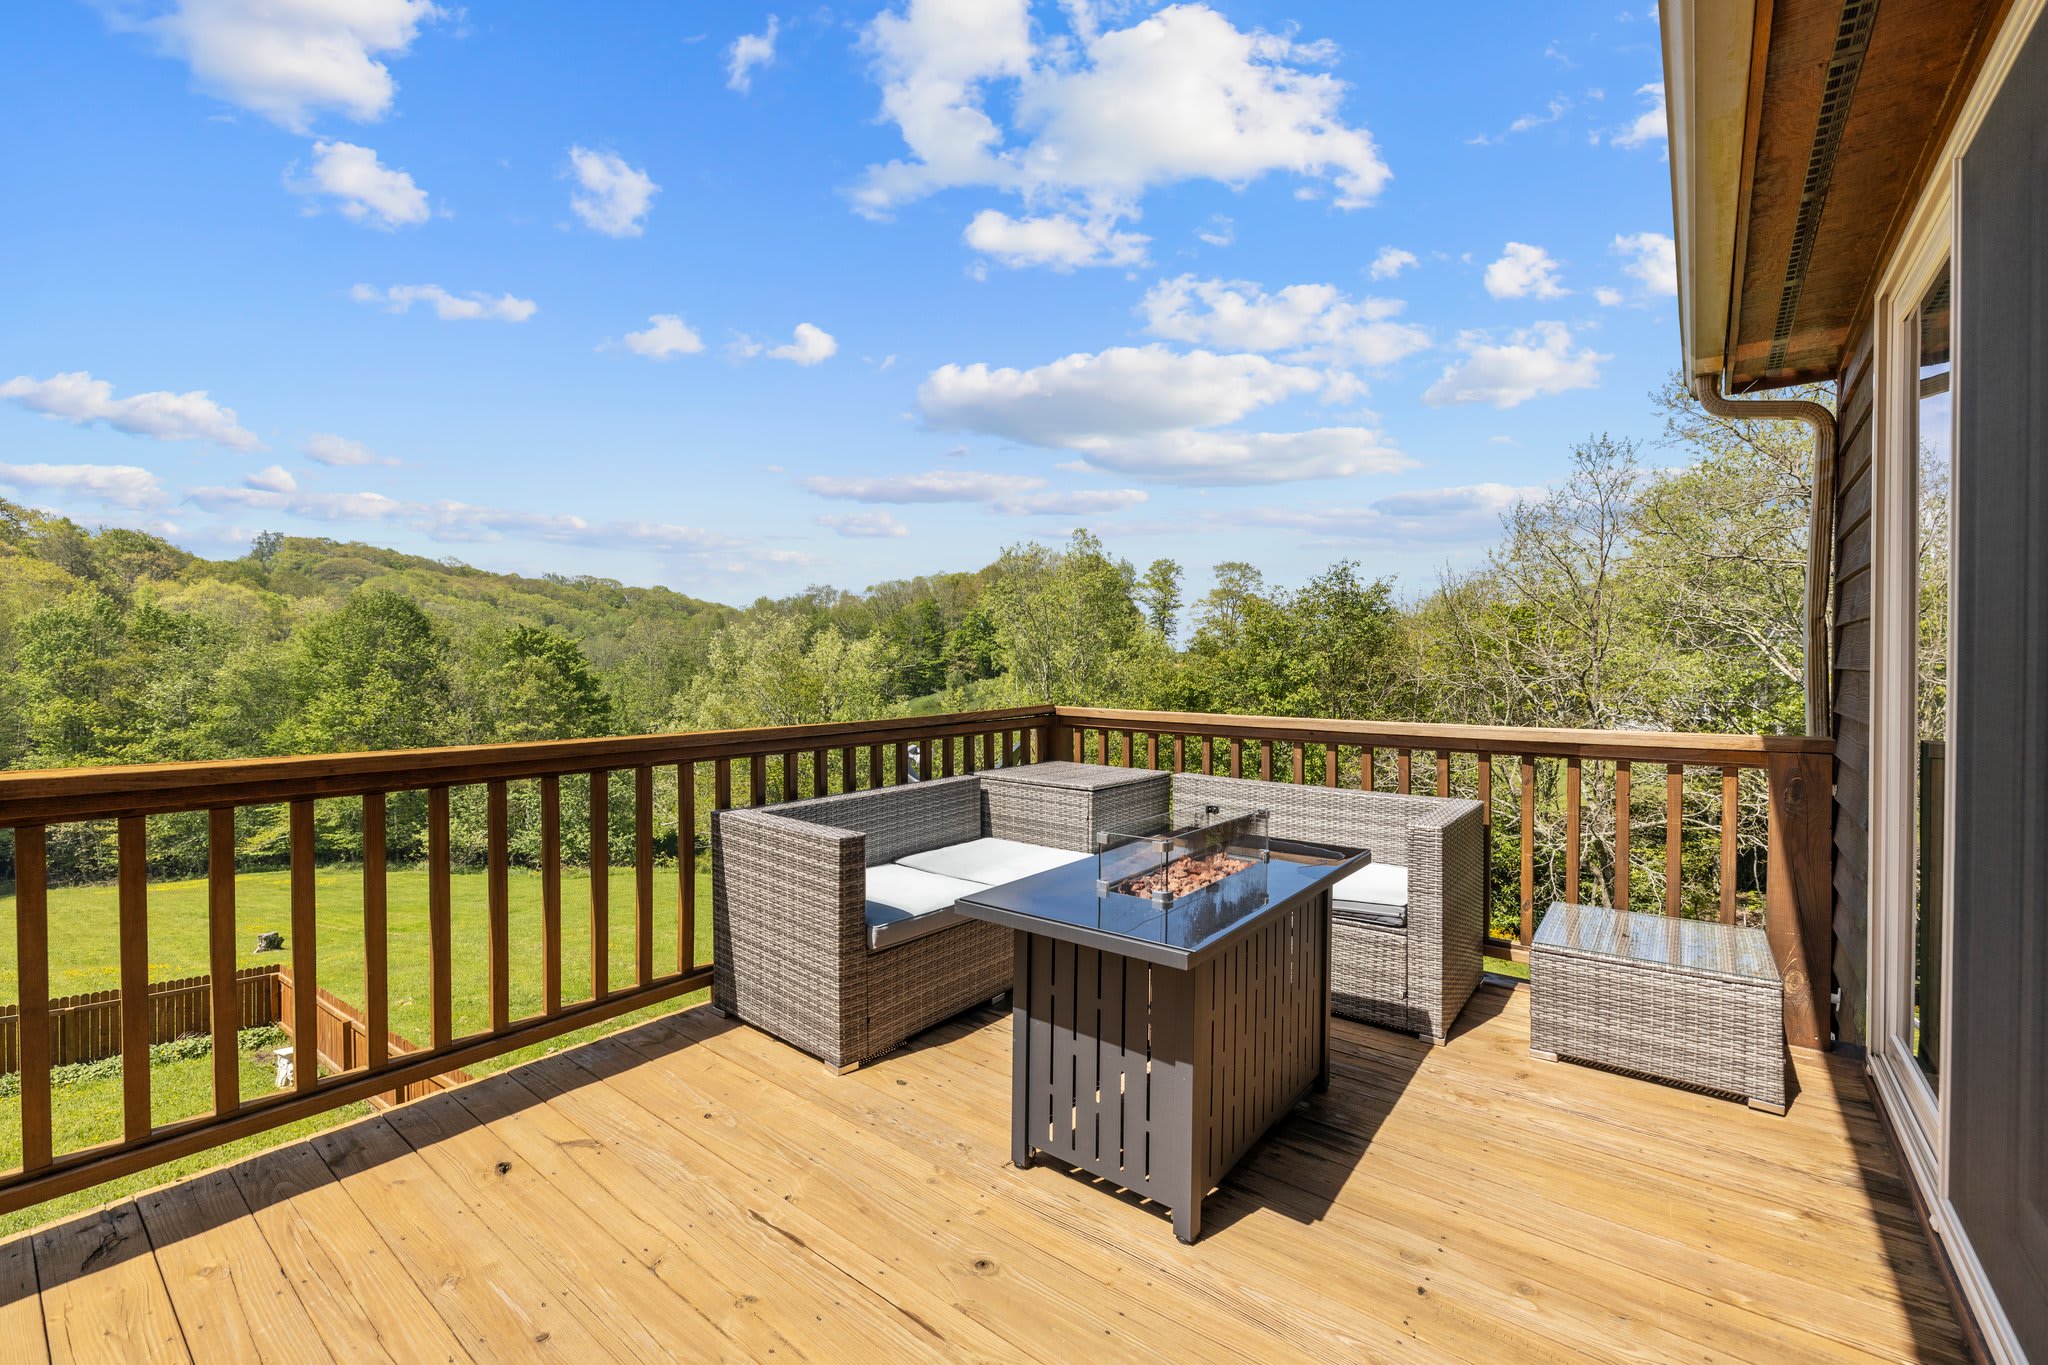 Large deck with a nice view, propane fire table and new outdoor seating